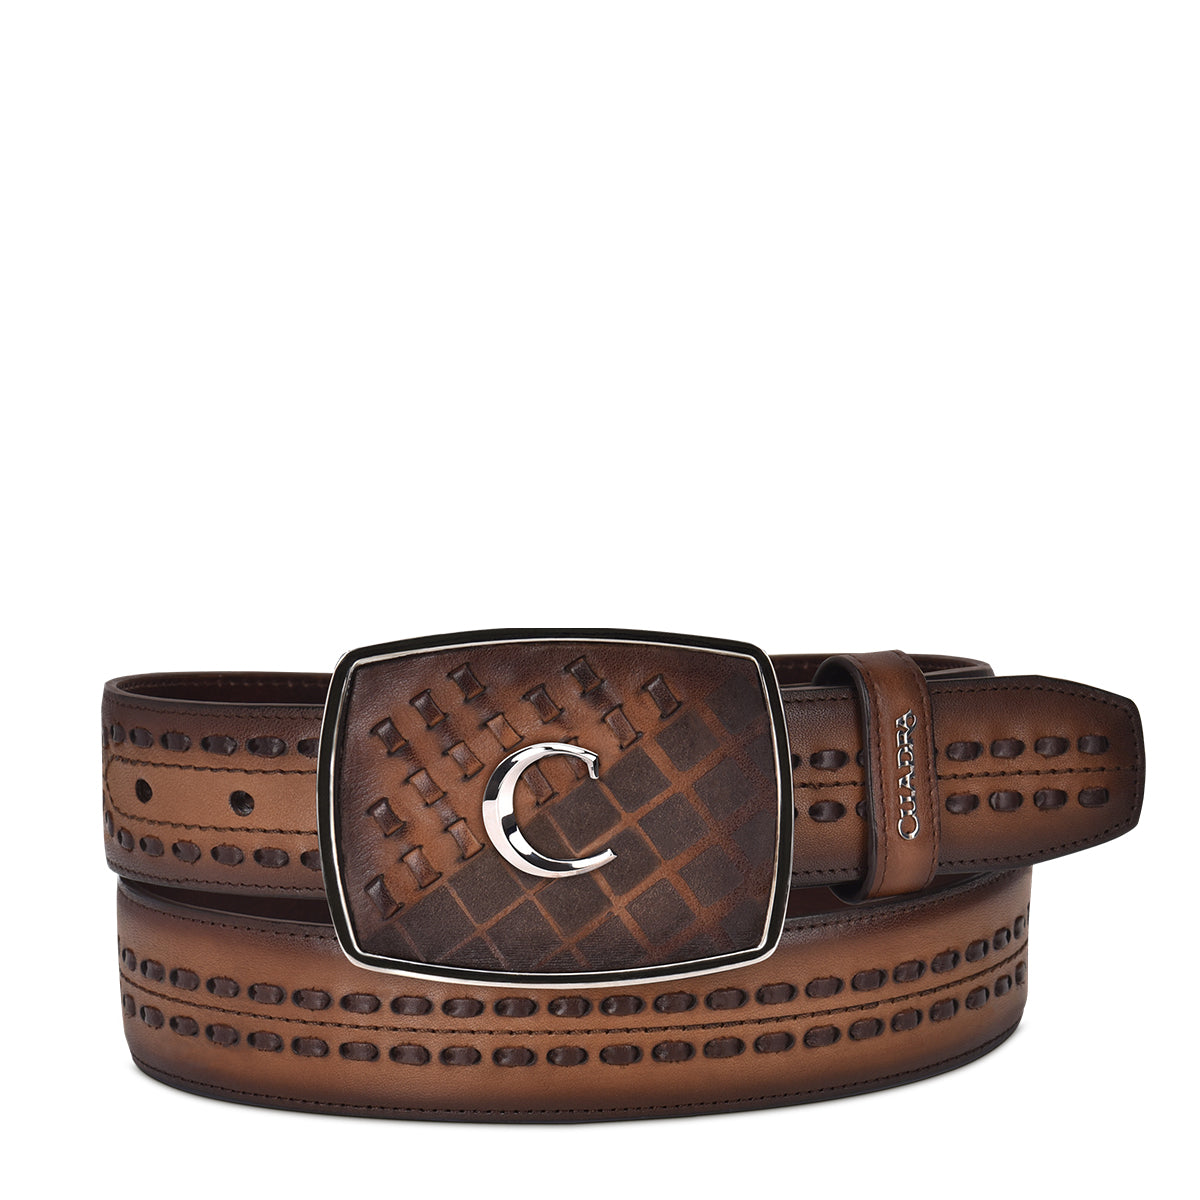 Hand-painted engraved honey western leather belt